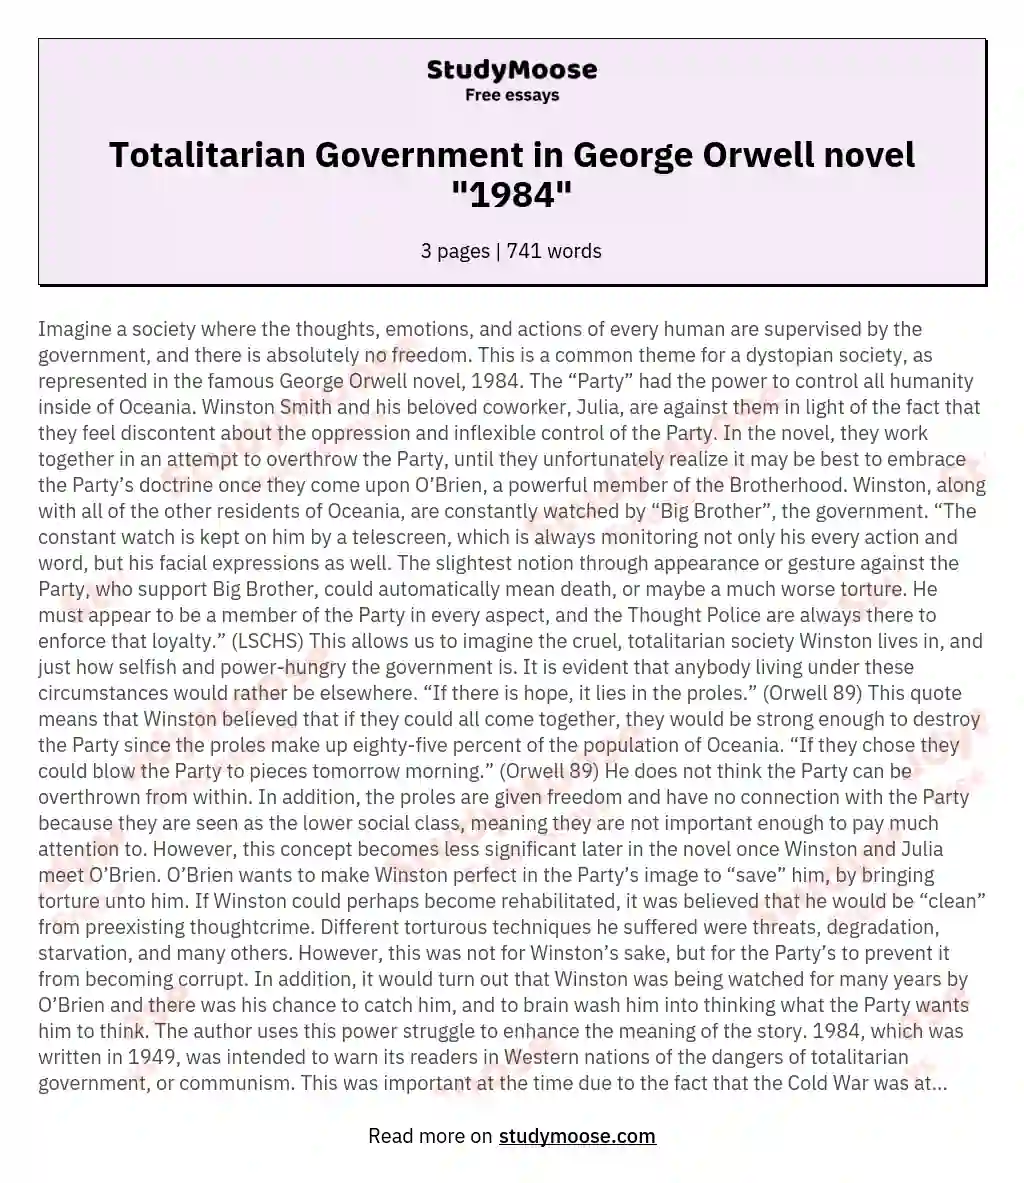 Totalitarian Government in George Orwell novel "1984" essay